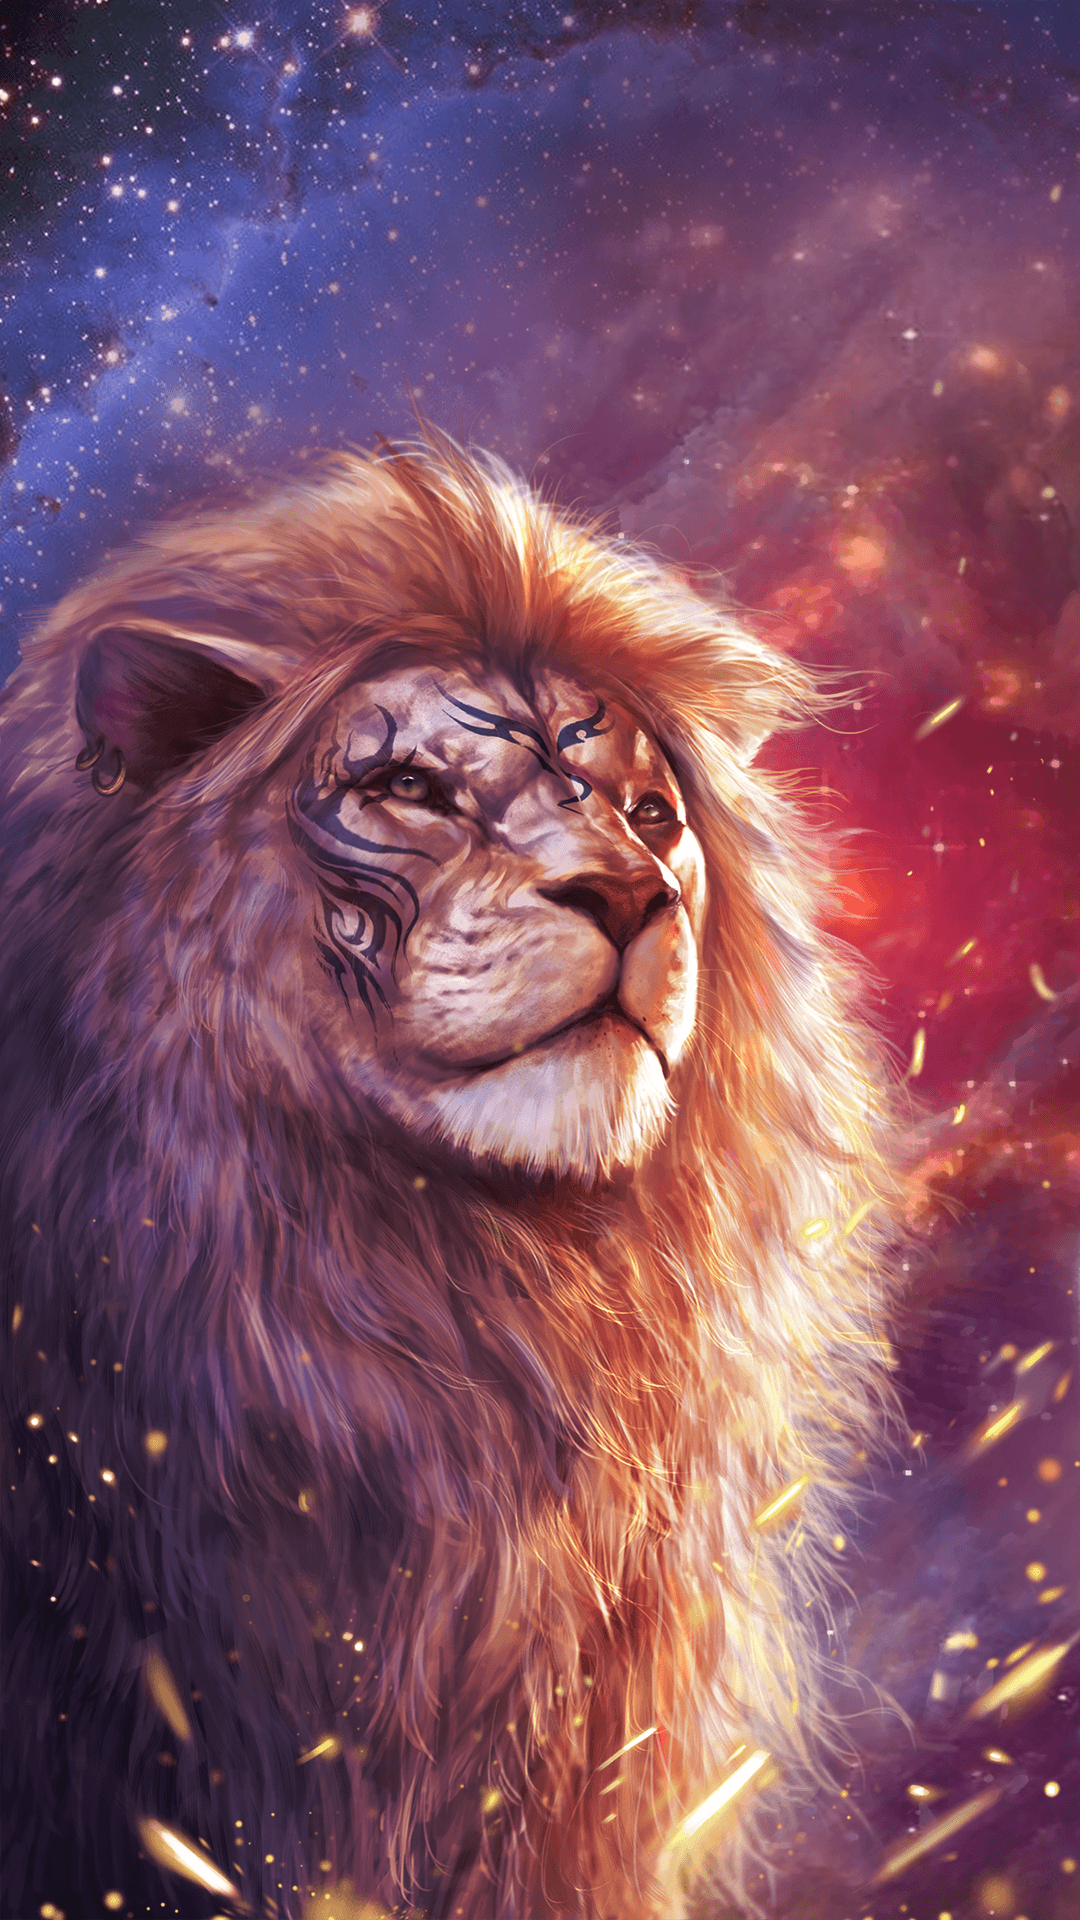 Wallpaper Hd Android Lion